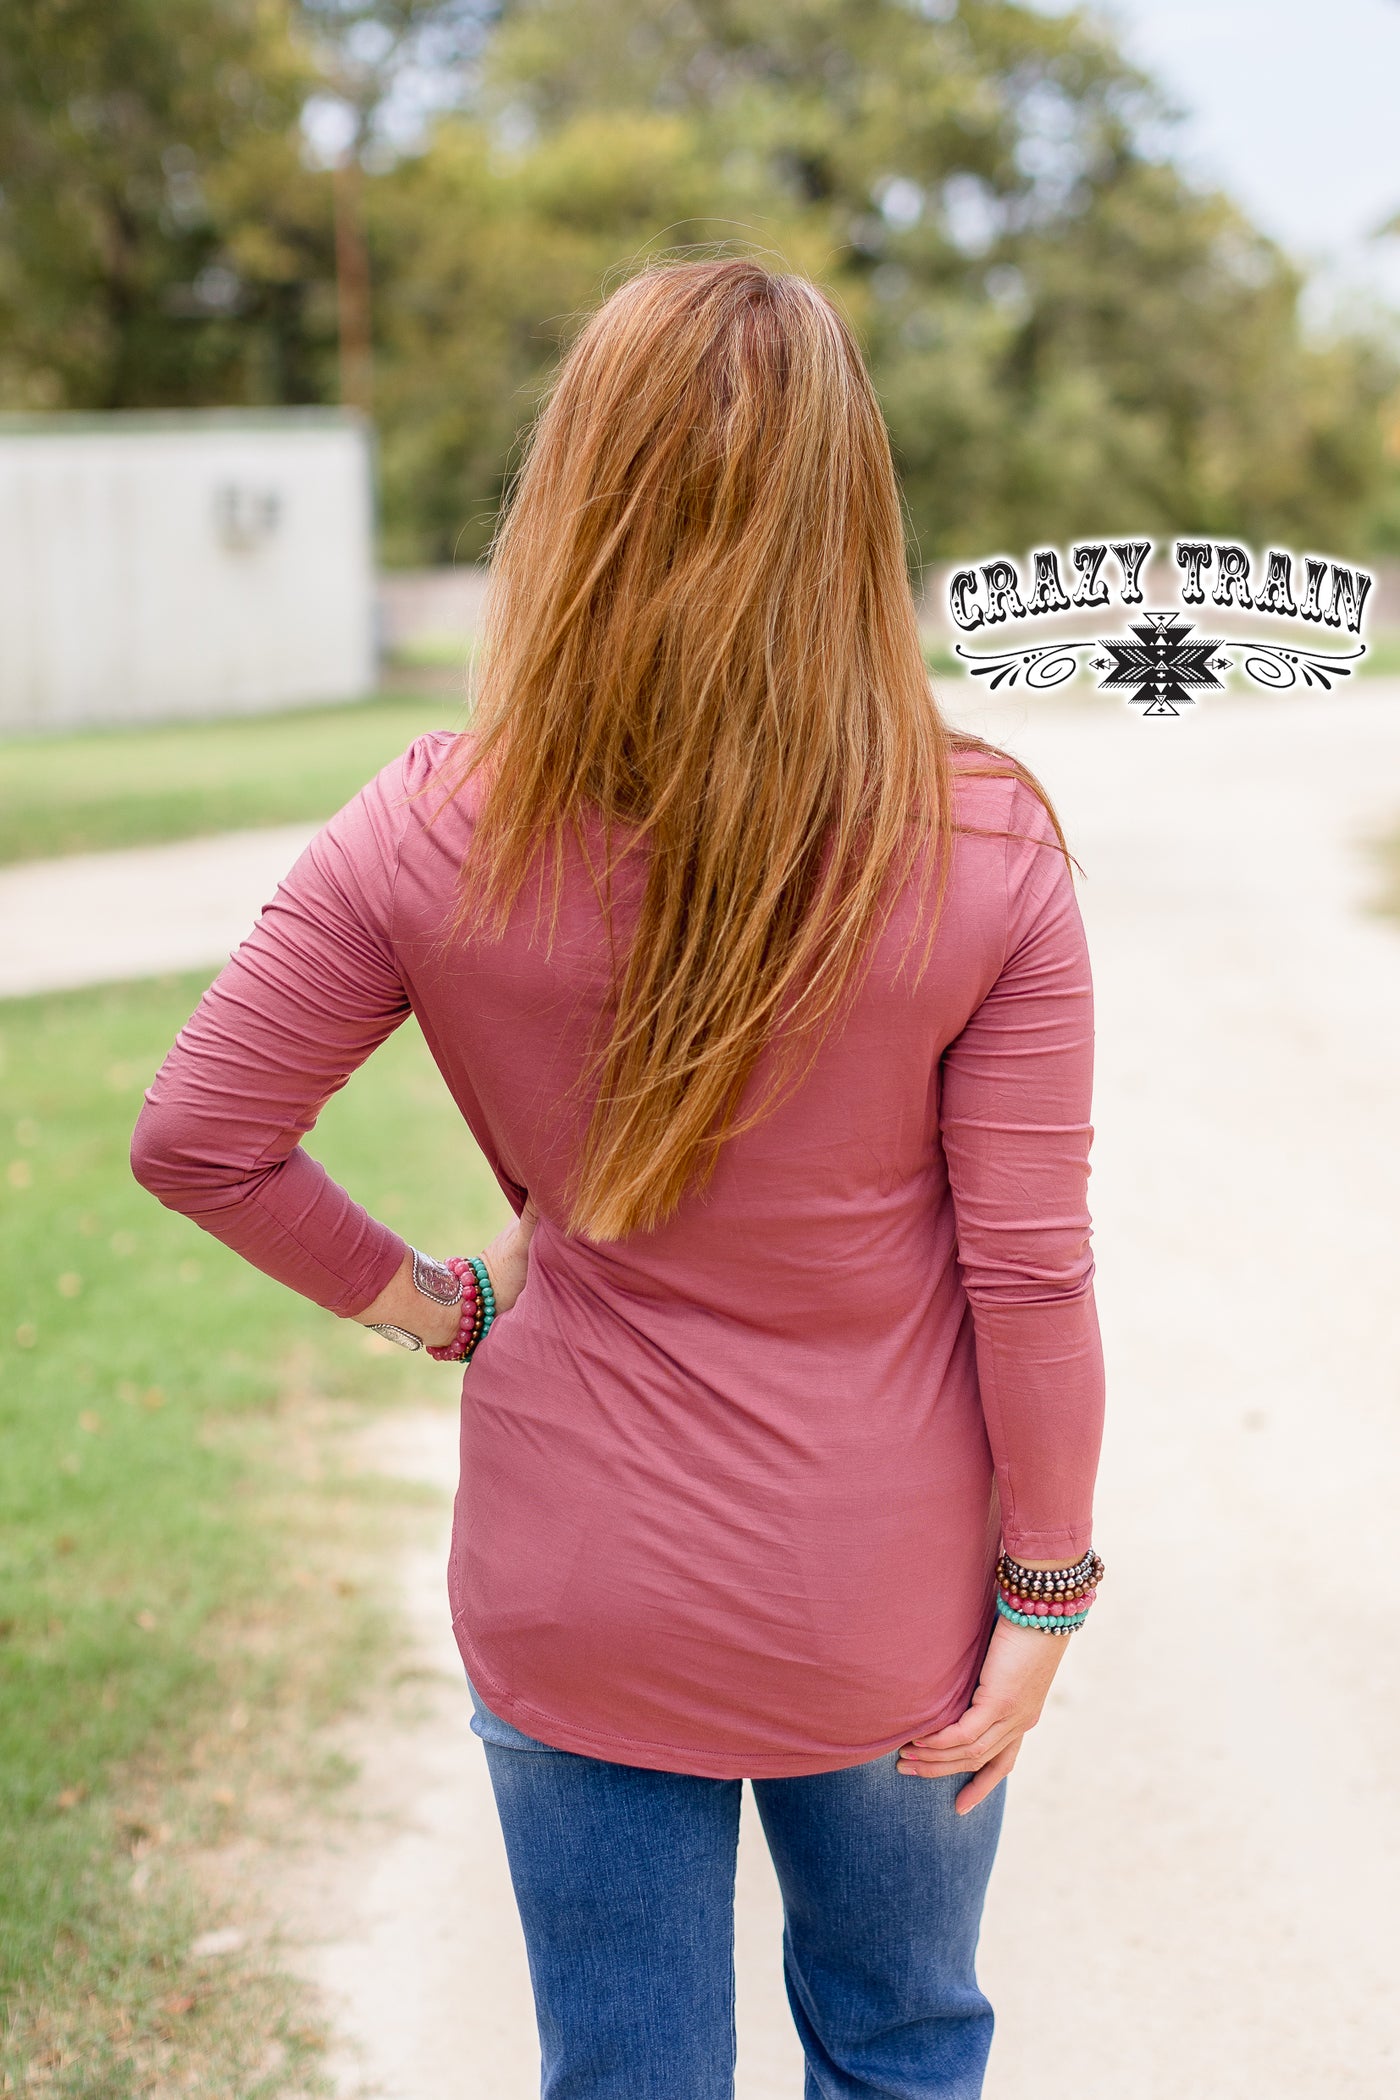 Long sleeve Top  Pinedale Basic Long-sleeved Top from Crazy Train Apparel